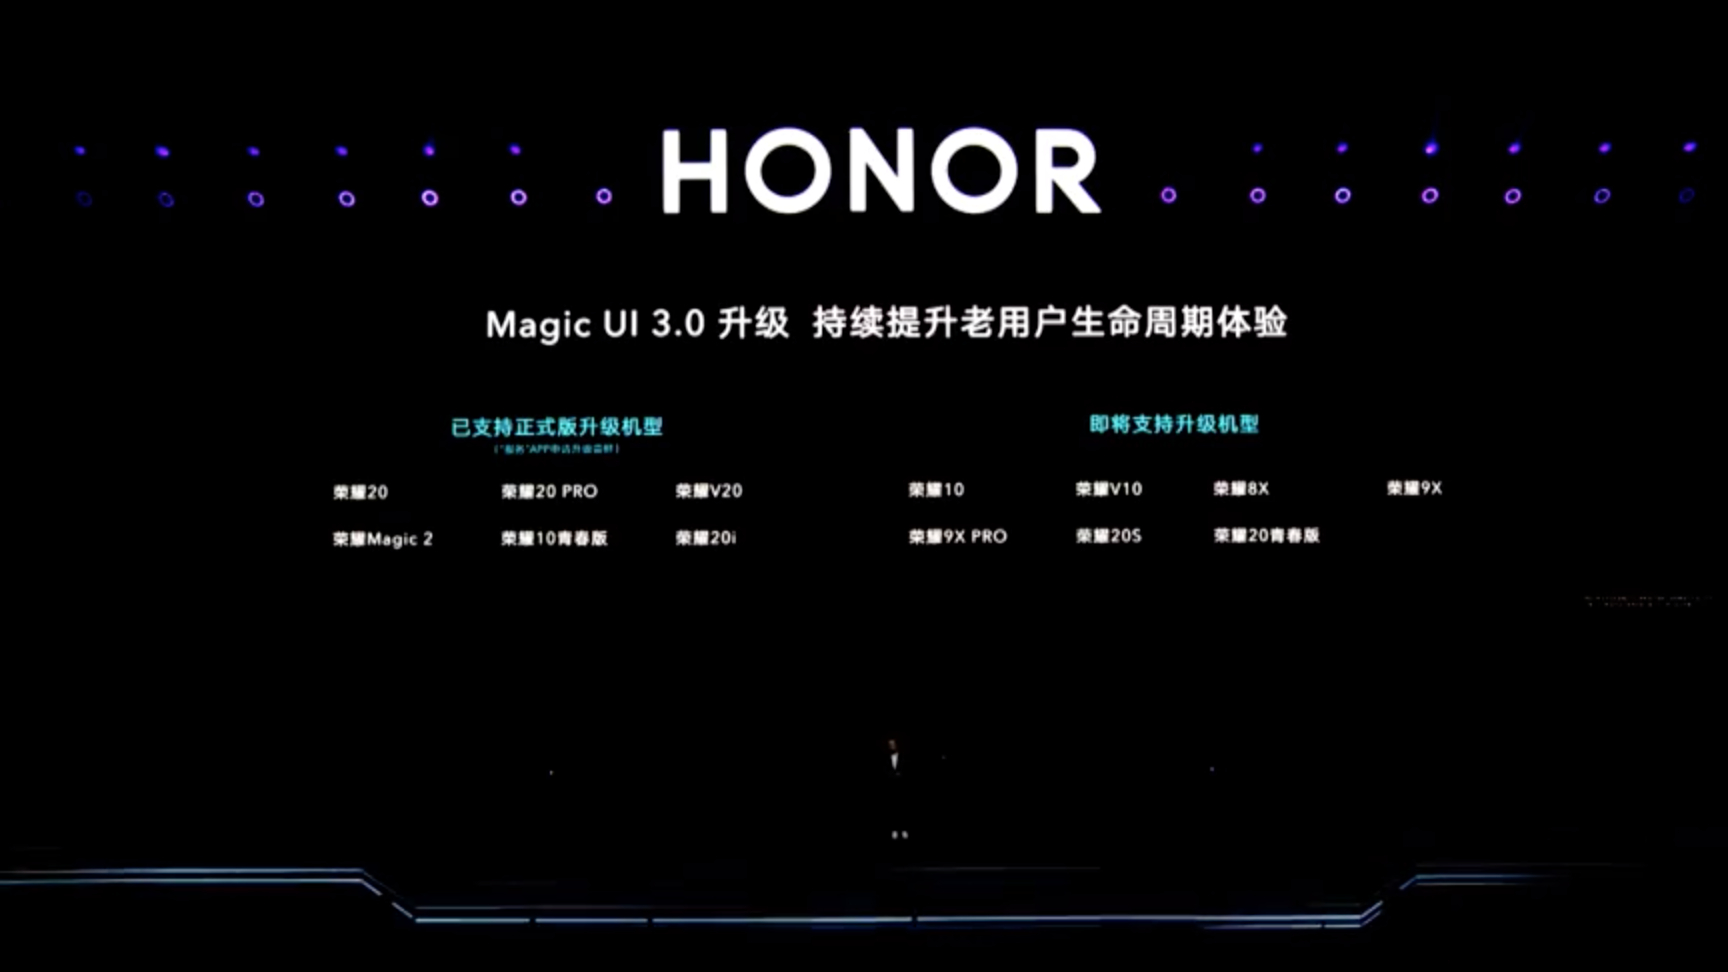 Honor Magic UI 3 update announcement on stage